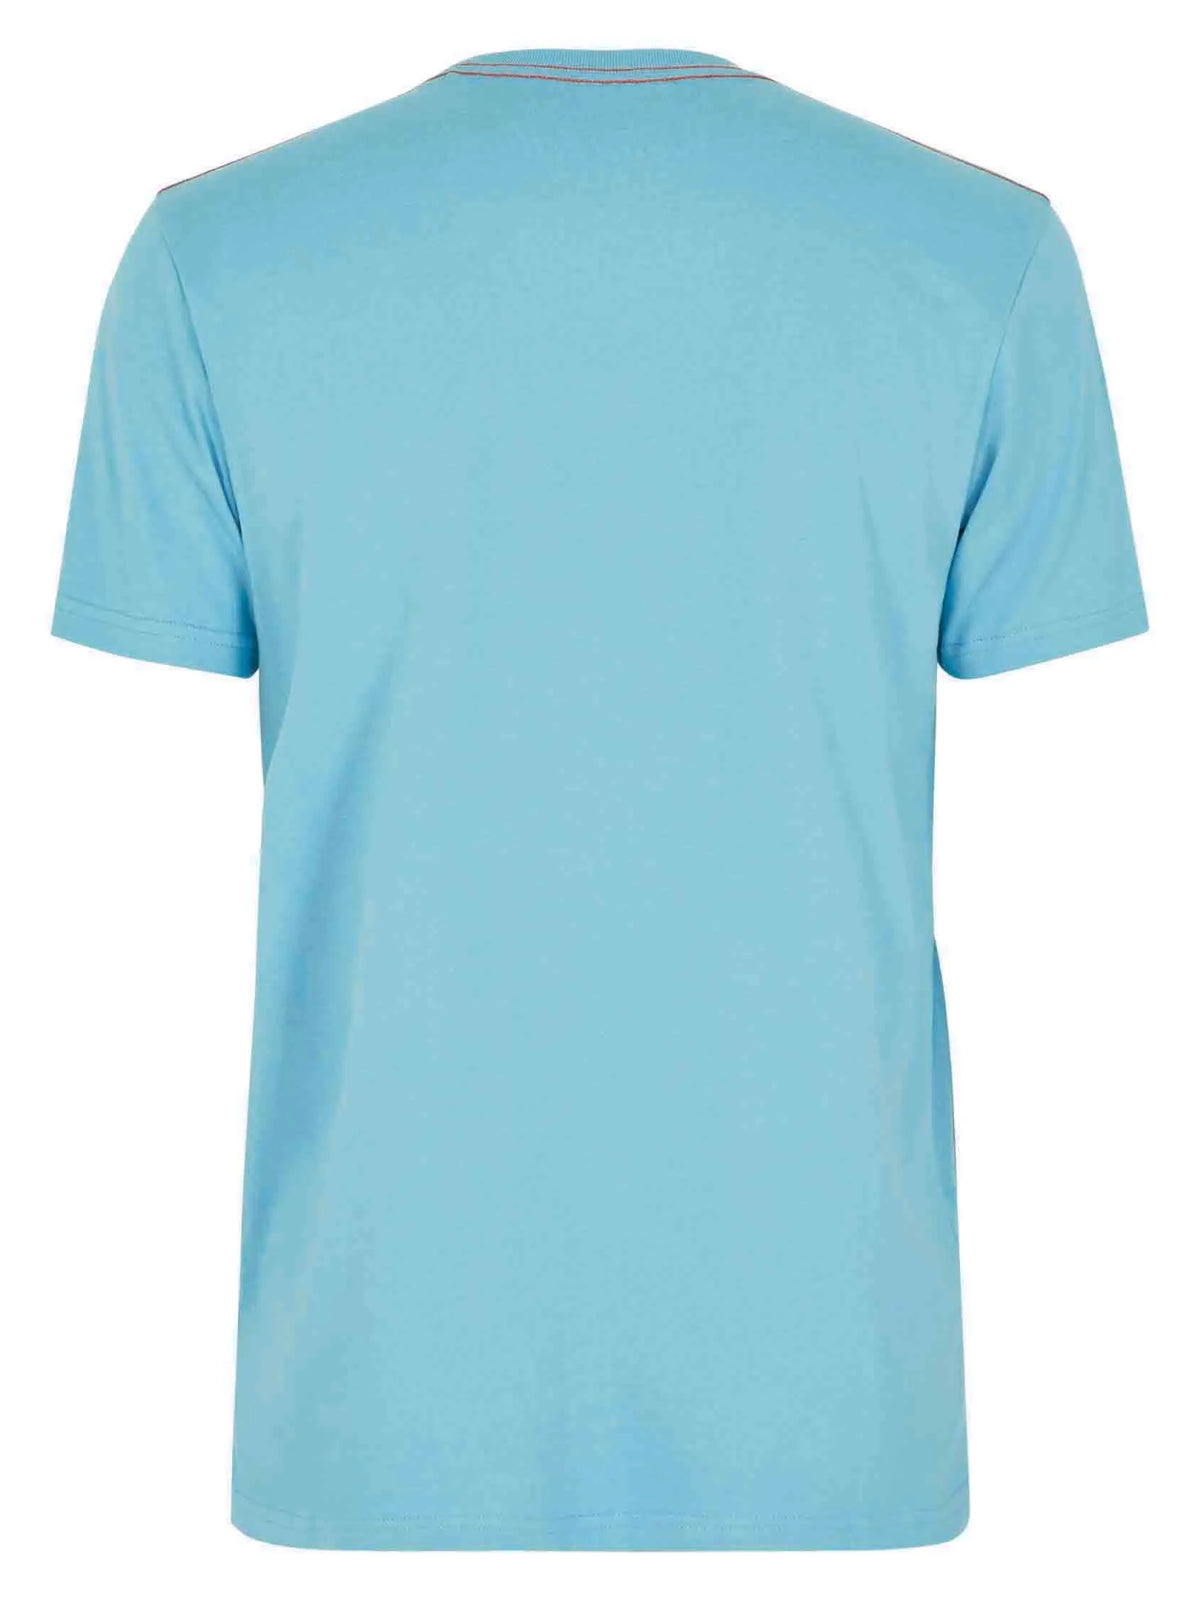 Weird Fish men's paddleboarder print tee in Sky Blue with plain back and contrast stitching.